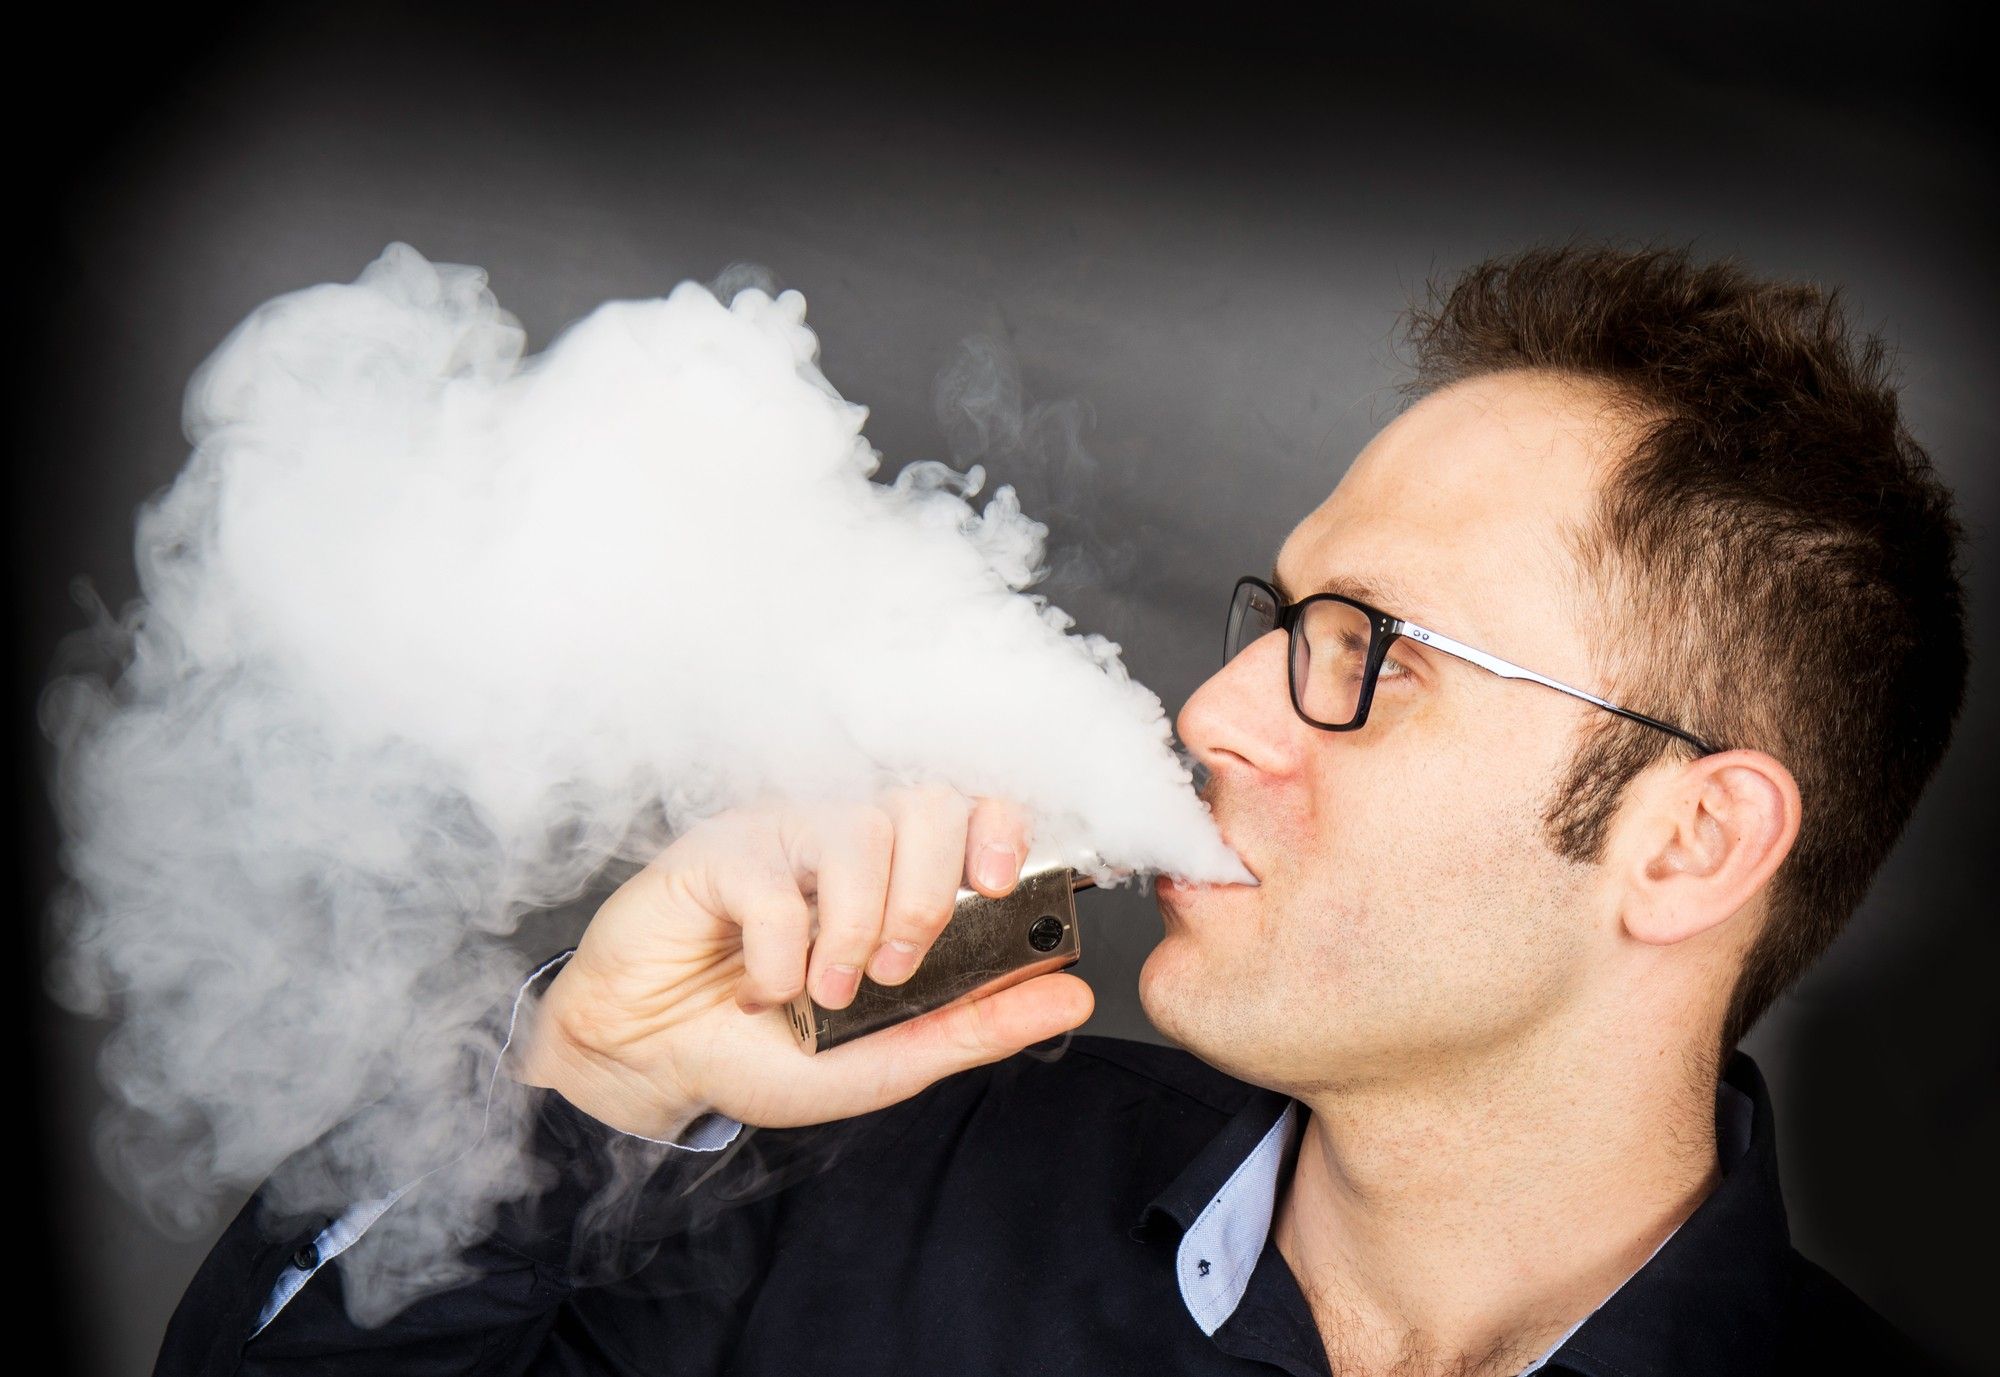 E-cigarette addiction is a growing problem with severe health effects.